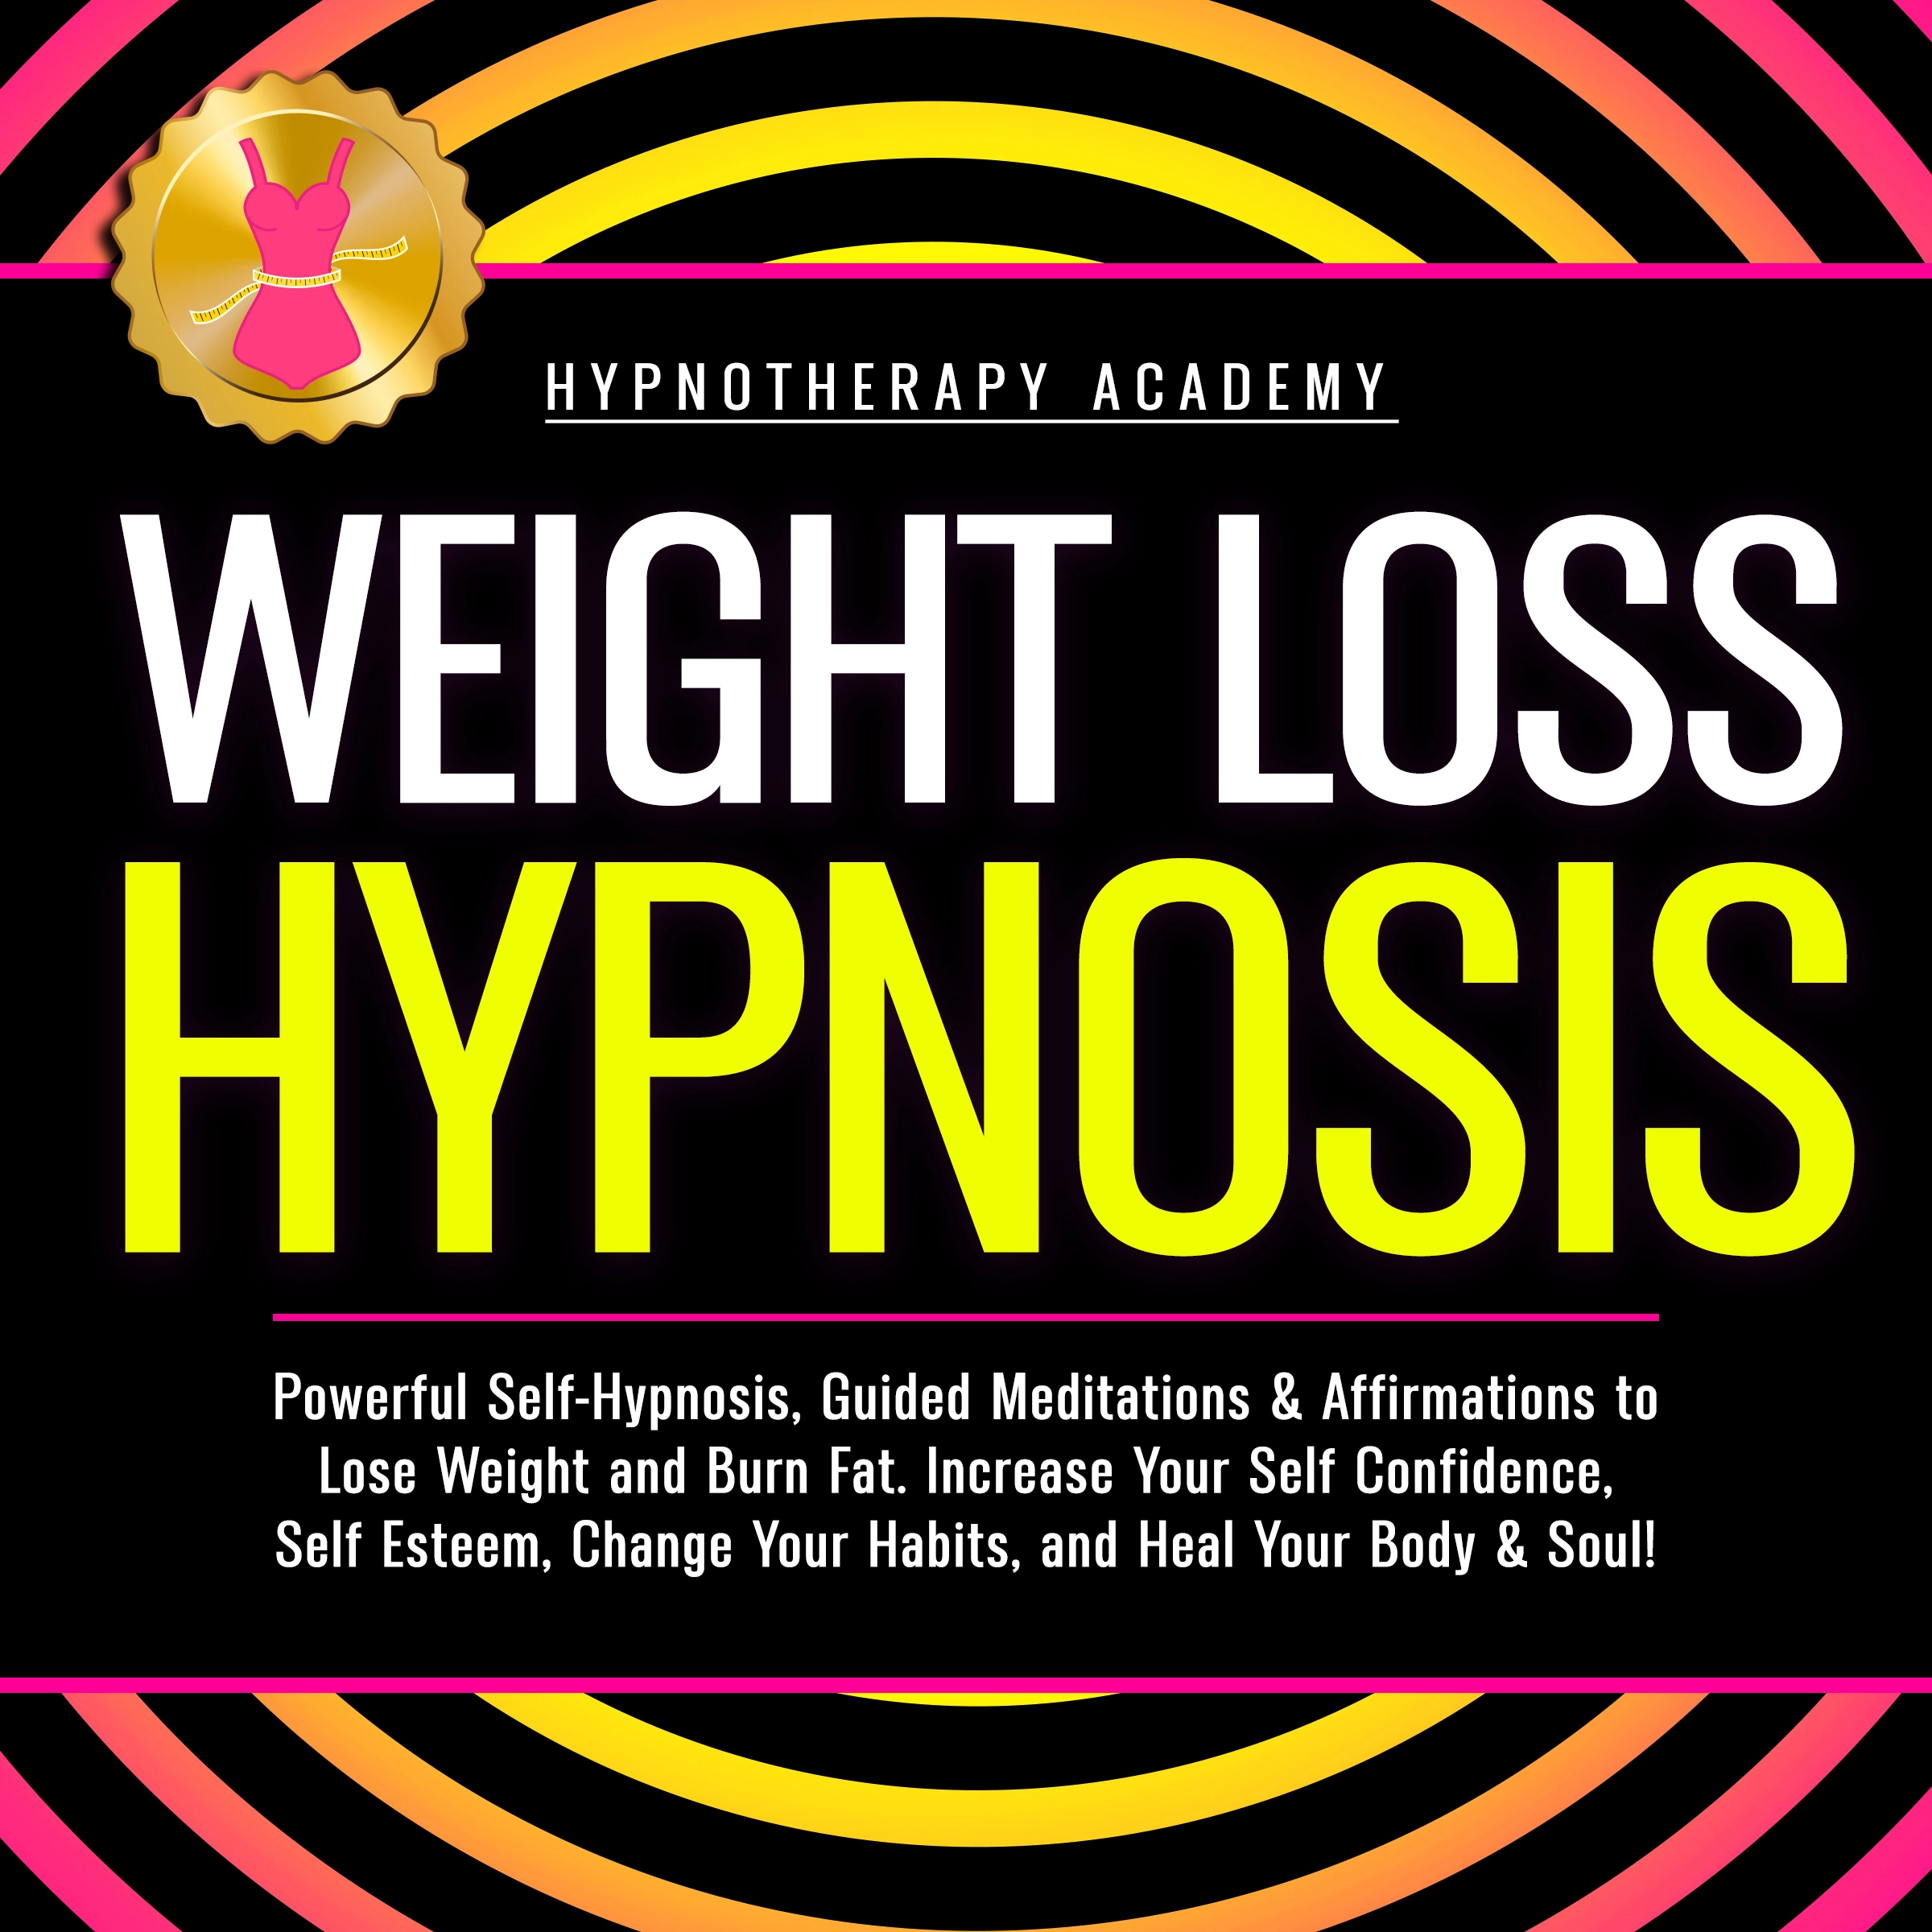 Weight Loss Hypnosis: Powerful Self-Hypnosis, Guided Meditations & Affirmations to Lose Weight and Burn Fat. Increase Your Self Confidence, Self Esteem, Change Your Habits, and Heal Your Body & Soul! by Hypnotherapy Academy Audiobook